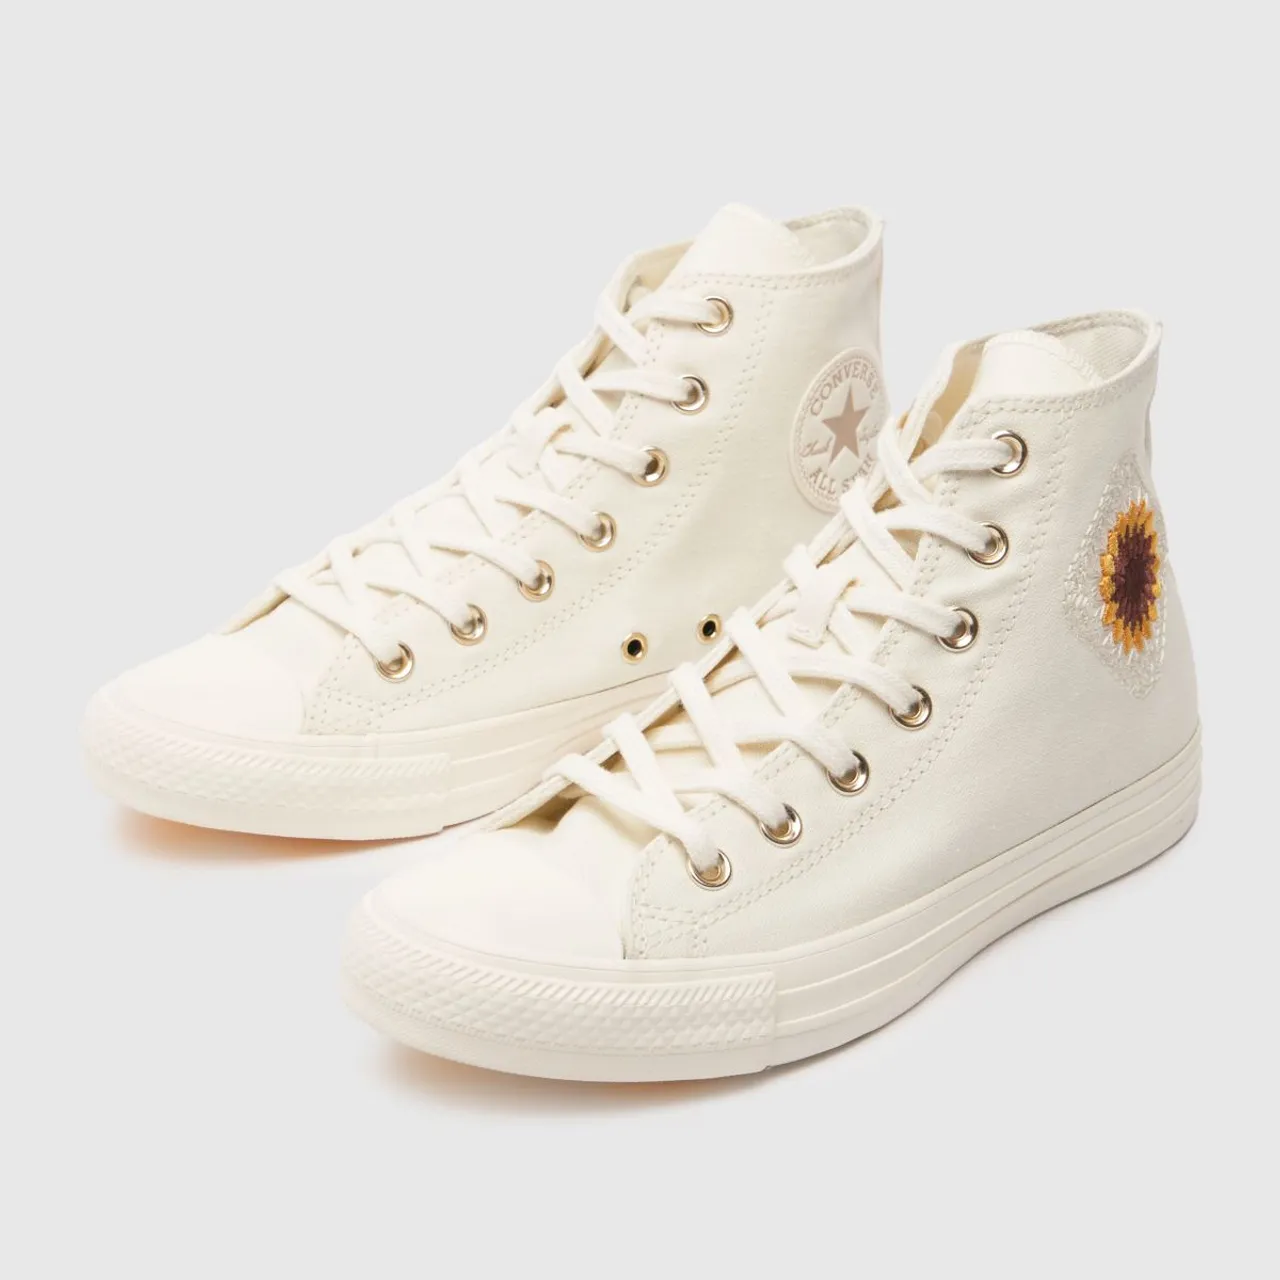 Converse All Star Hi Festival Floral Trainers In White & Gold